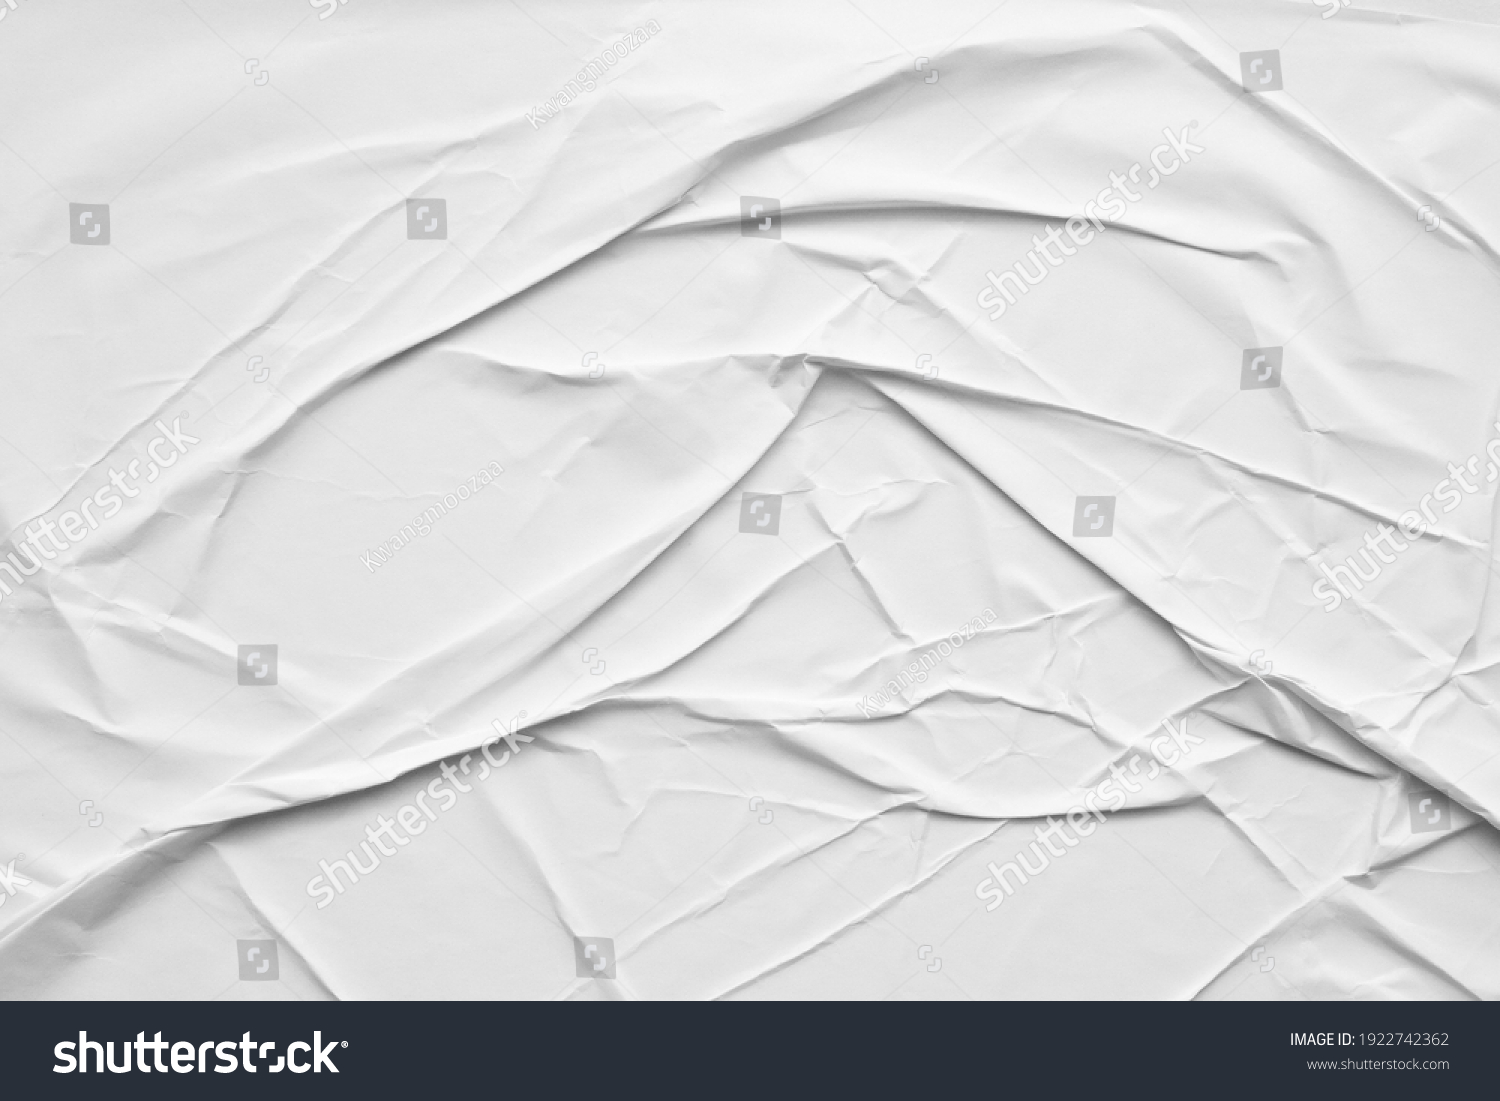 Blank white crumpled and creased paper poster texture background #1922742362